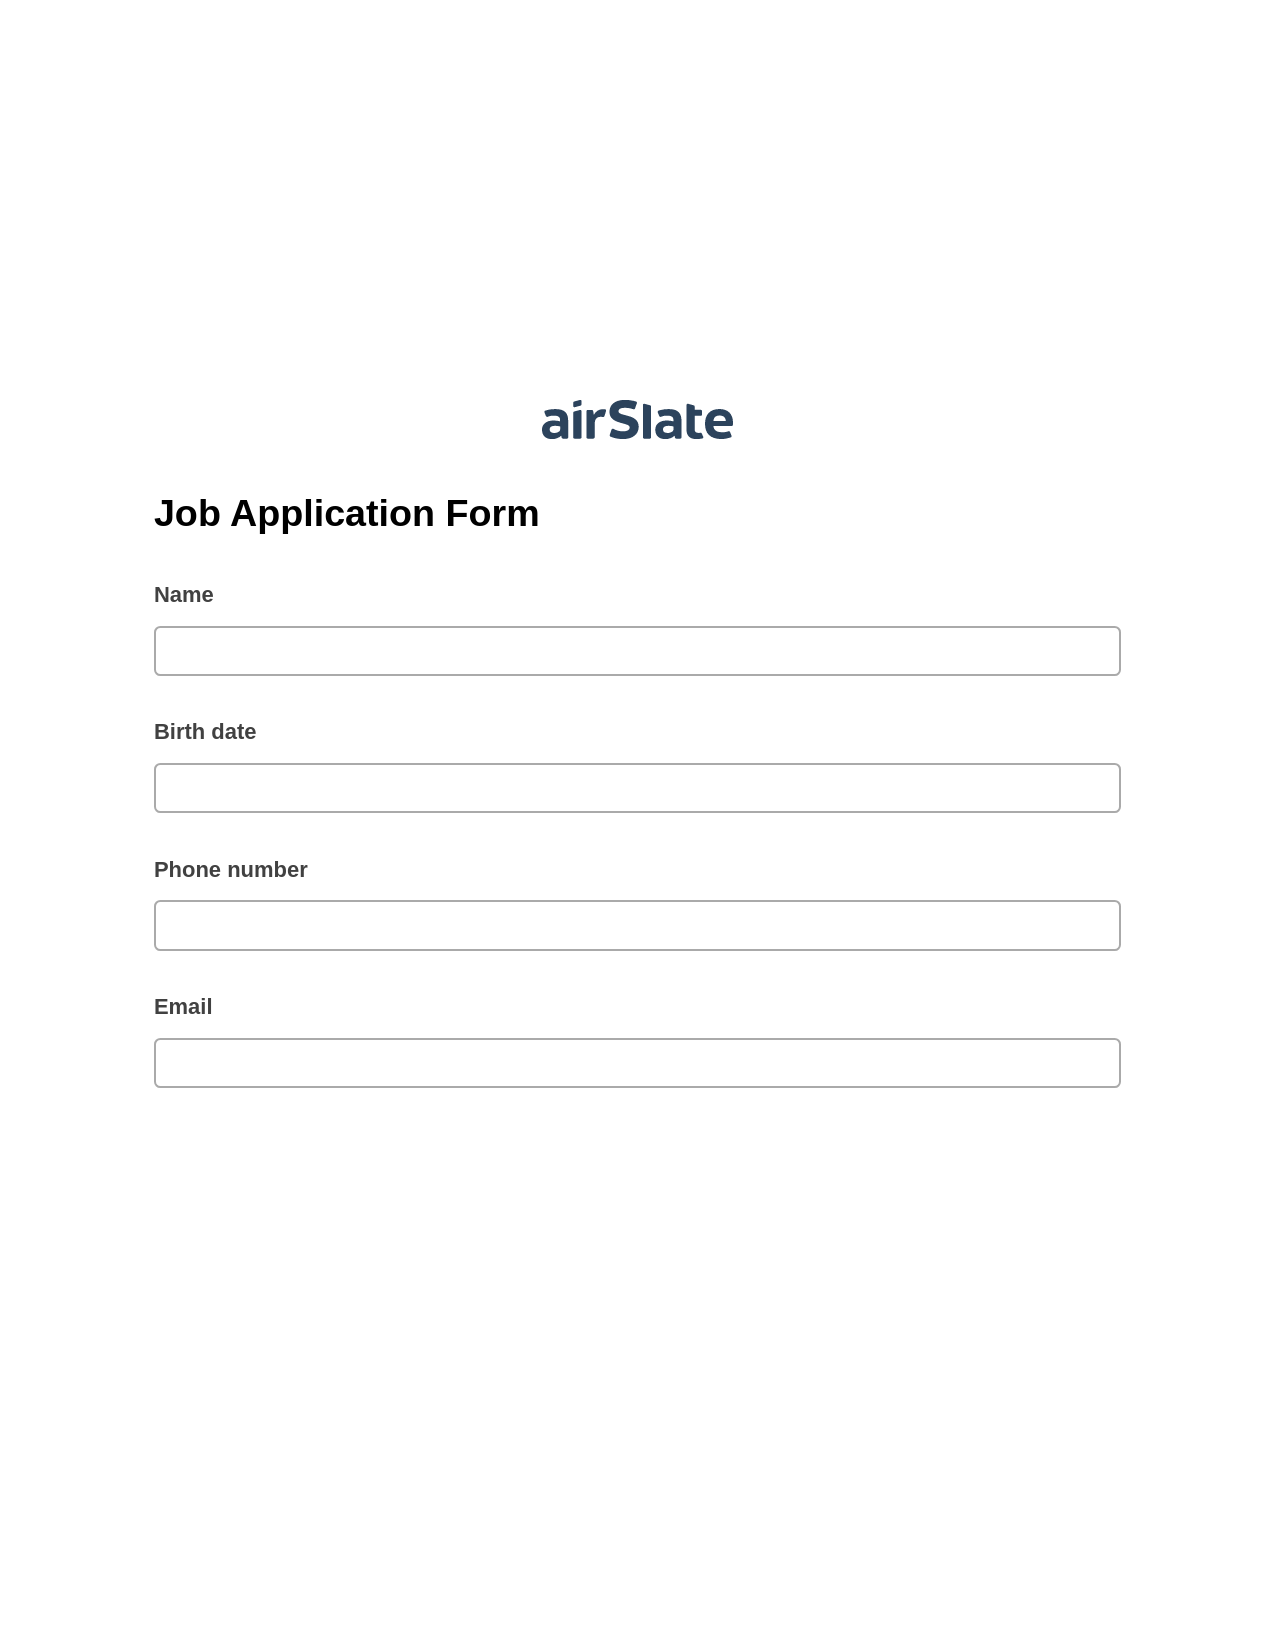 Multirole Job Application Form Pre-fill from Office 365 Excel Bot, Update NetSuite Records Bot, Export to MySQL Bot